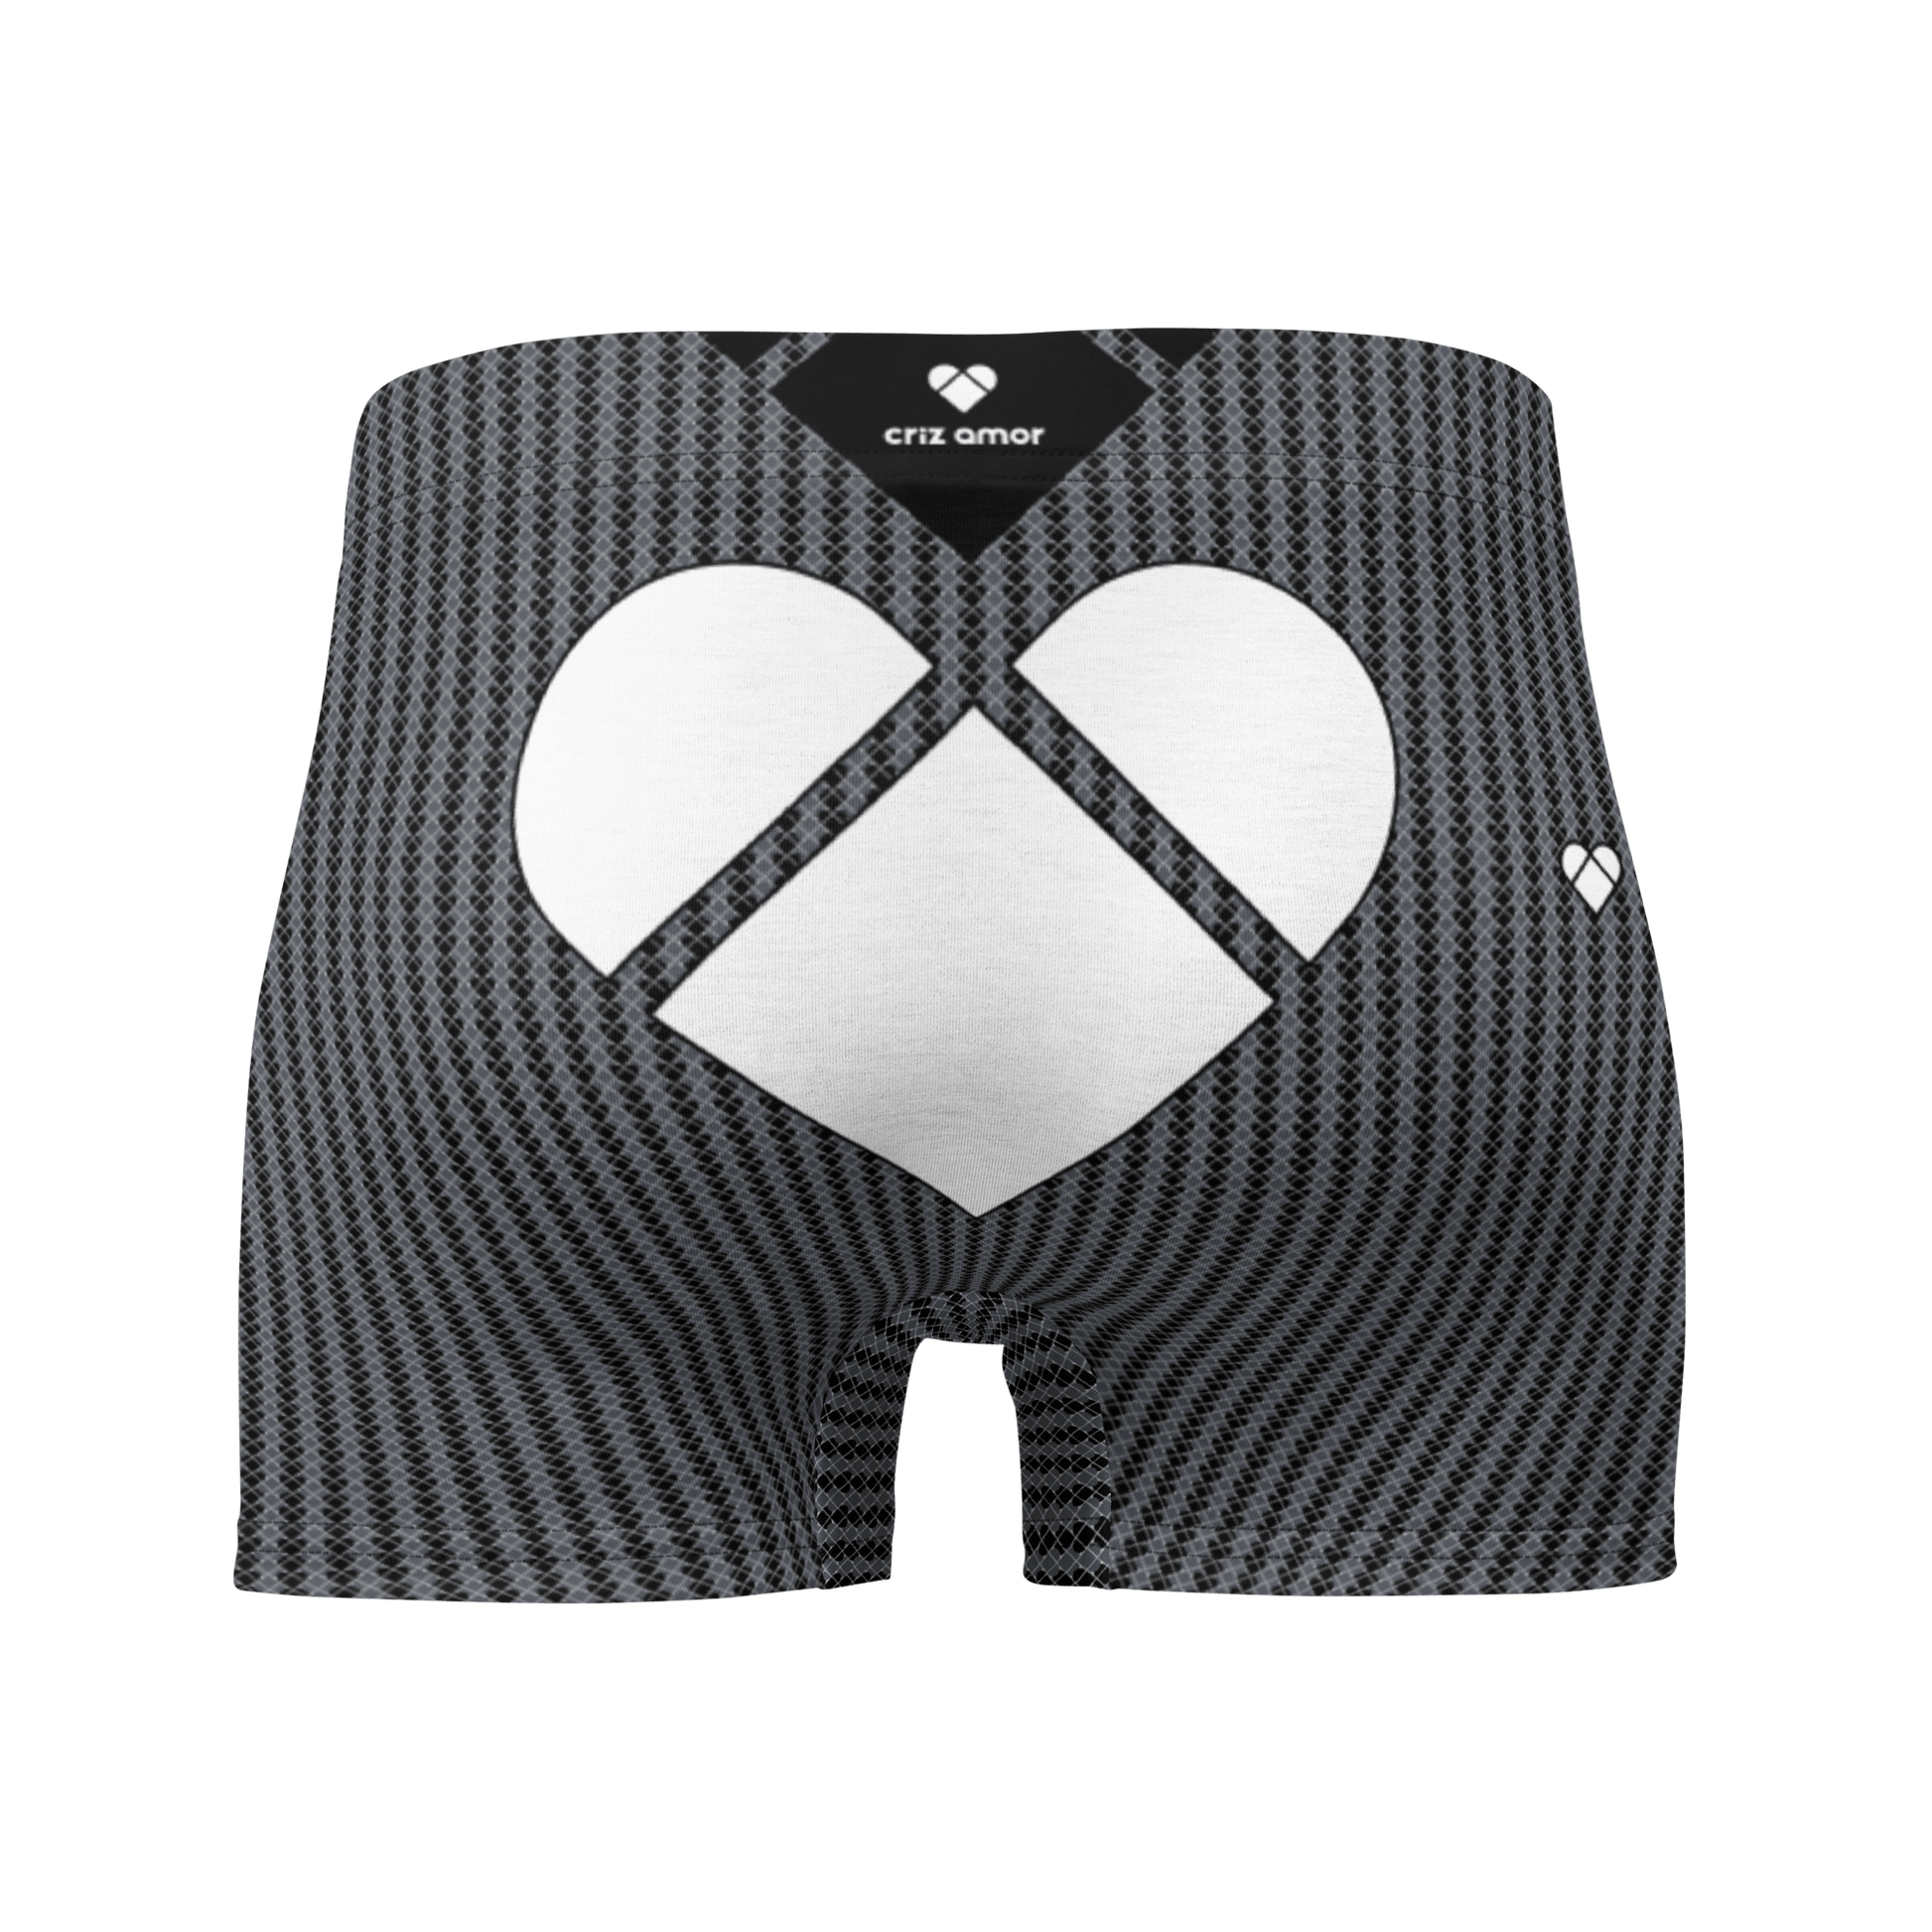 Men's Fashion with Heart Logo: Comfortable and empowering Lovogram Boxer Briefs